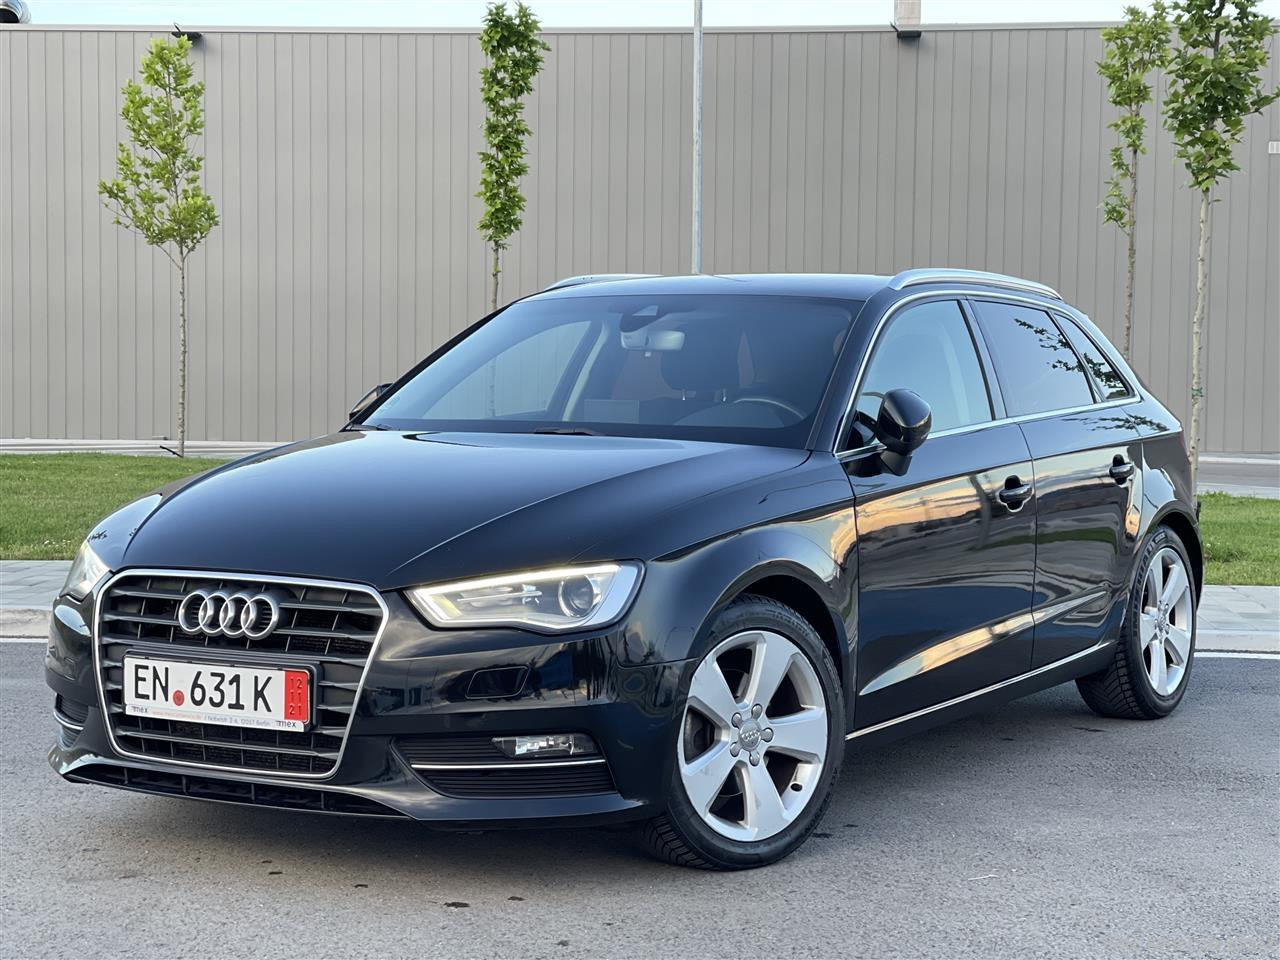 AUDI A3 2.0 TDI 150 ps Automatic Stronic 2016 Full Opsione